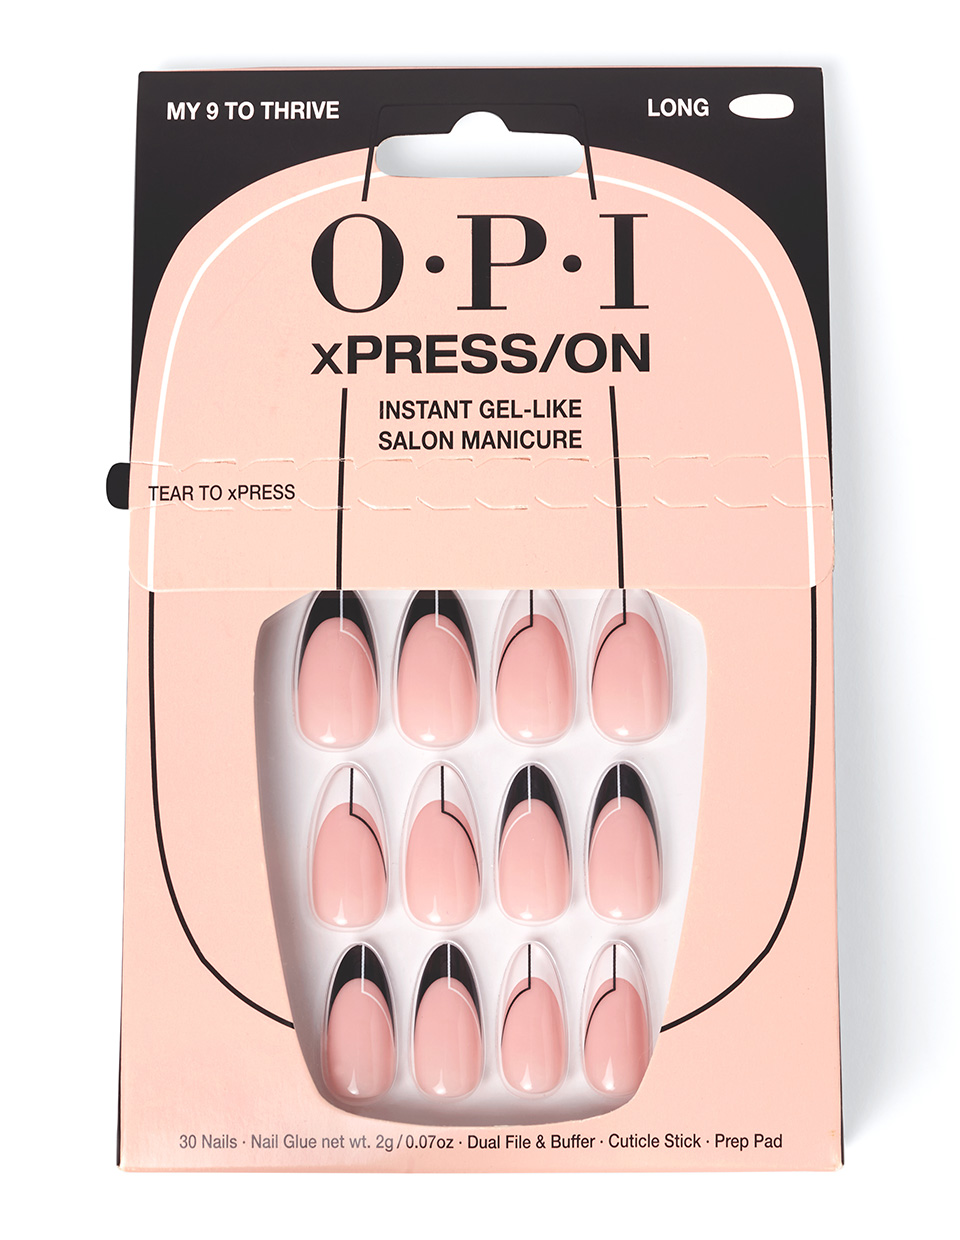 My 9 To Thrive Long French Tip Press-On Nails | OPI